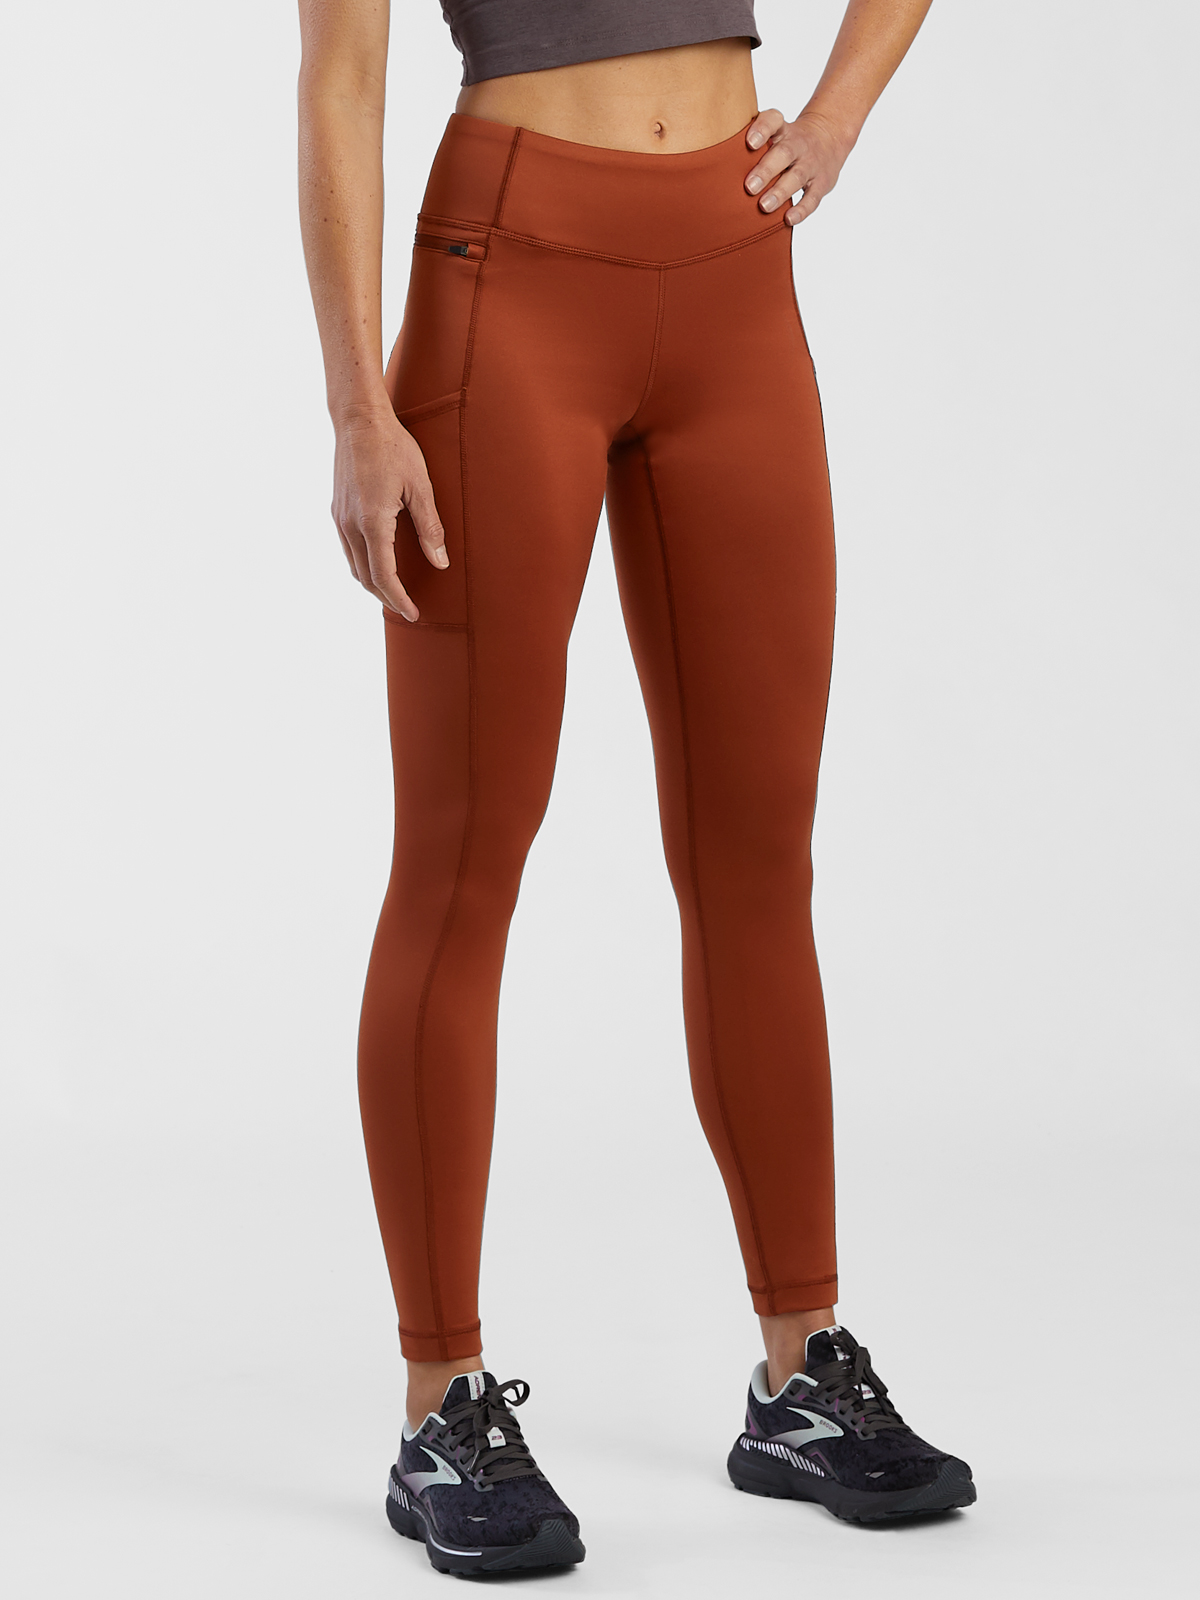 Patagonia W's Pack Out Tights - The Benchmark Outdoor Outfitters